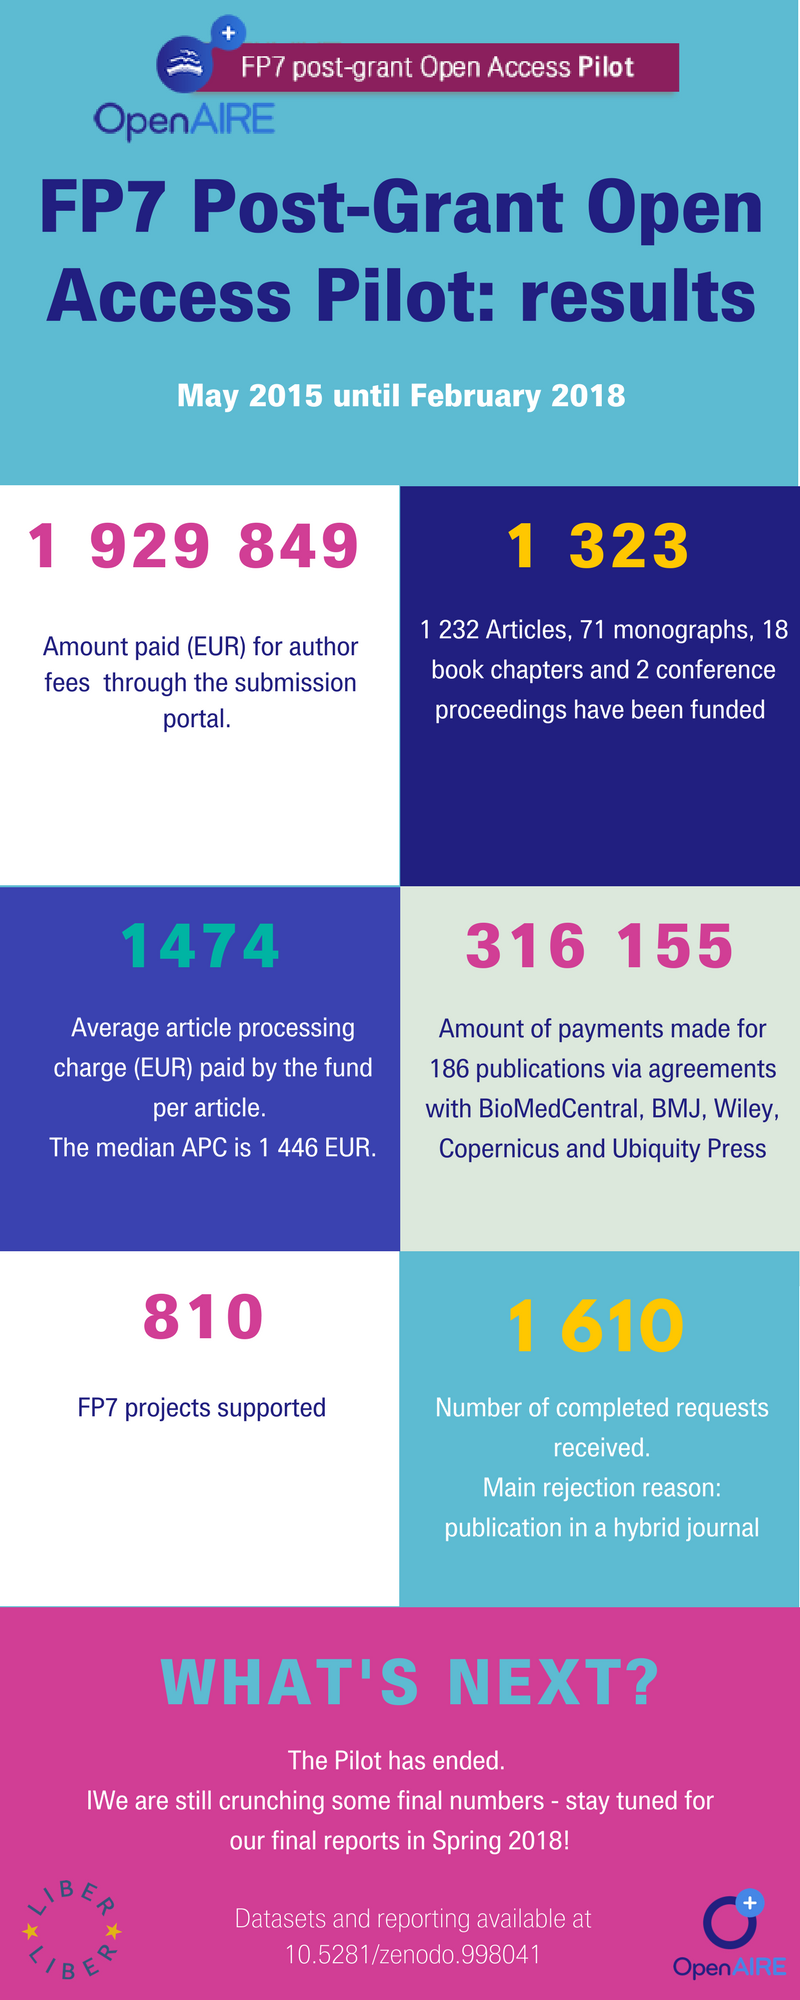 OpenAIRE infographic presenting the results of the Open Access pilot